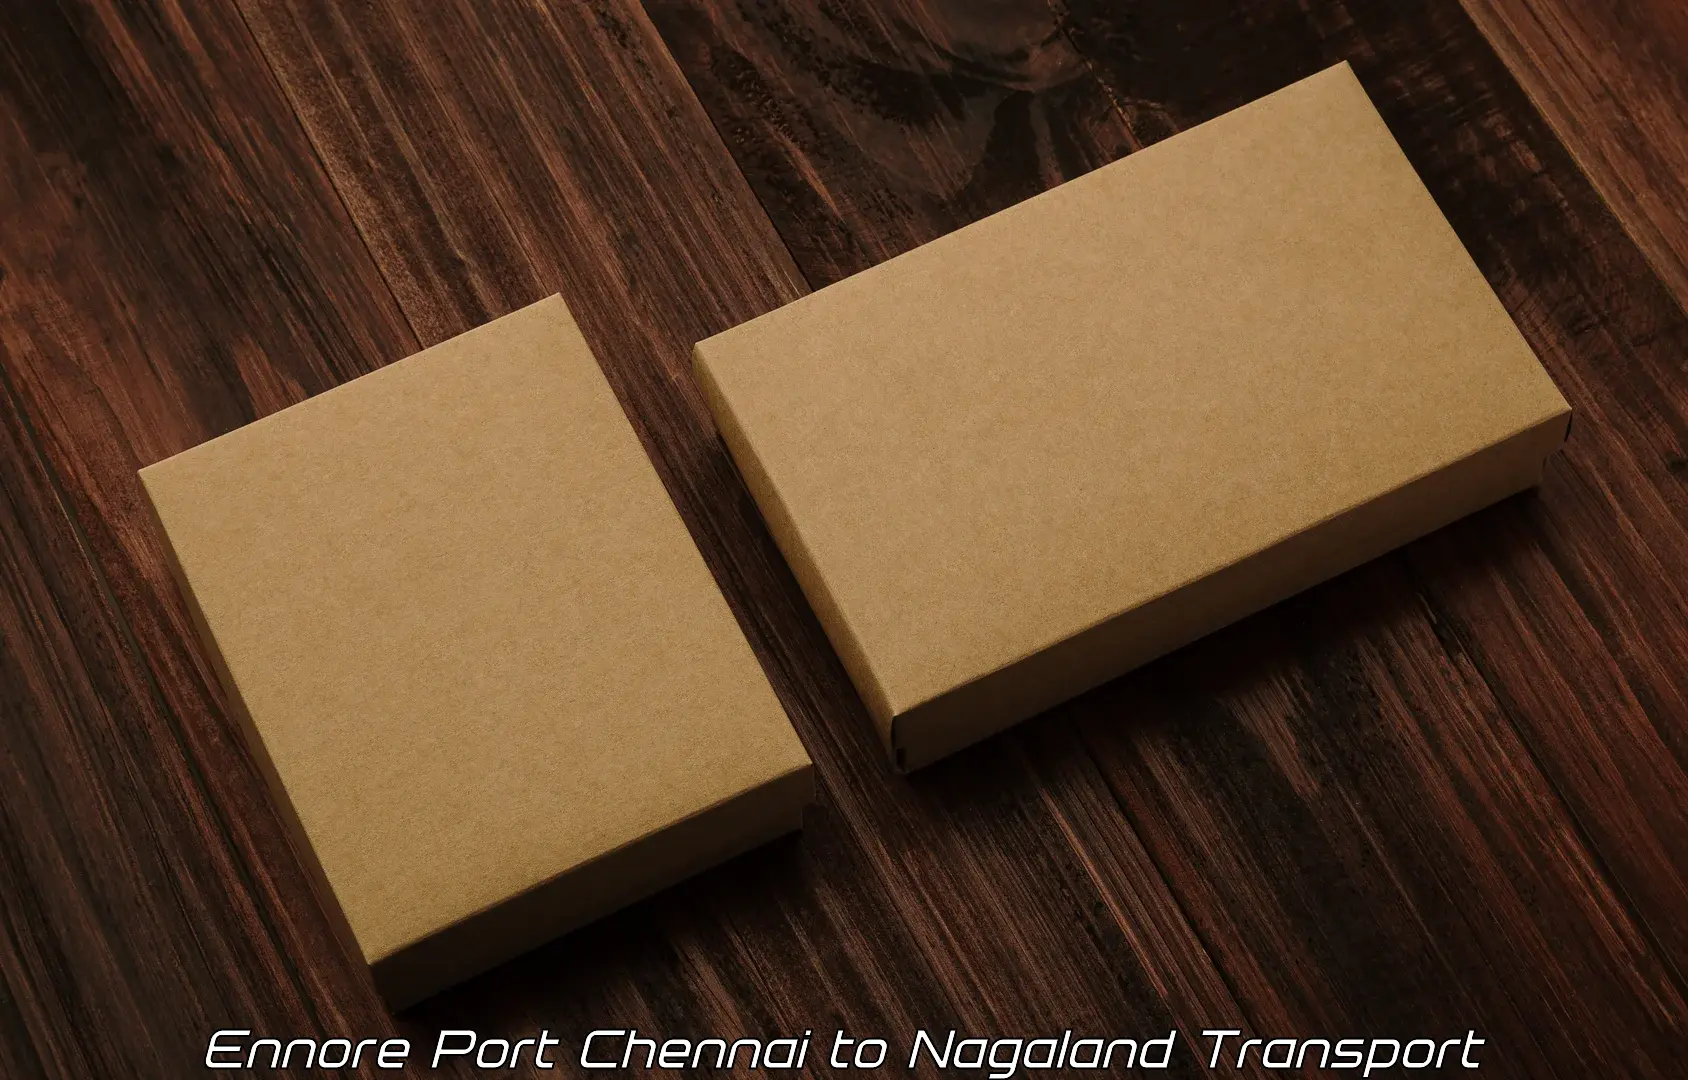 Two wheeler transport services Ennore Port Chennai to Kiphire